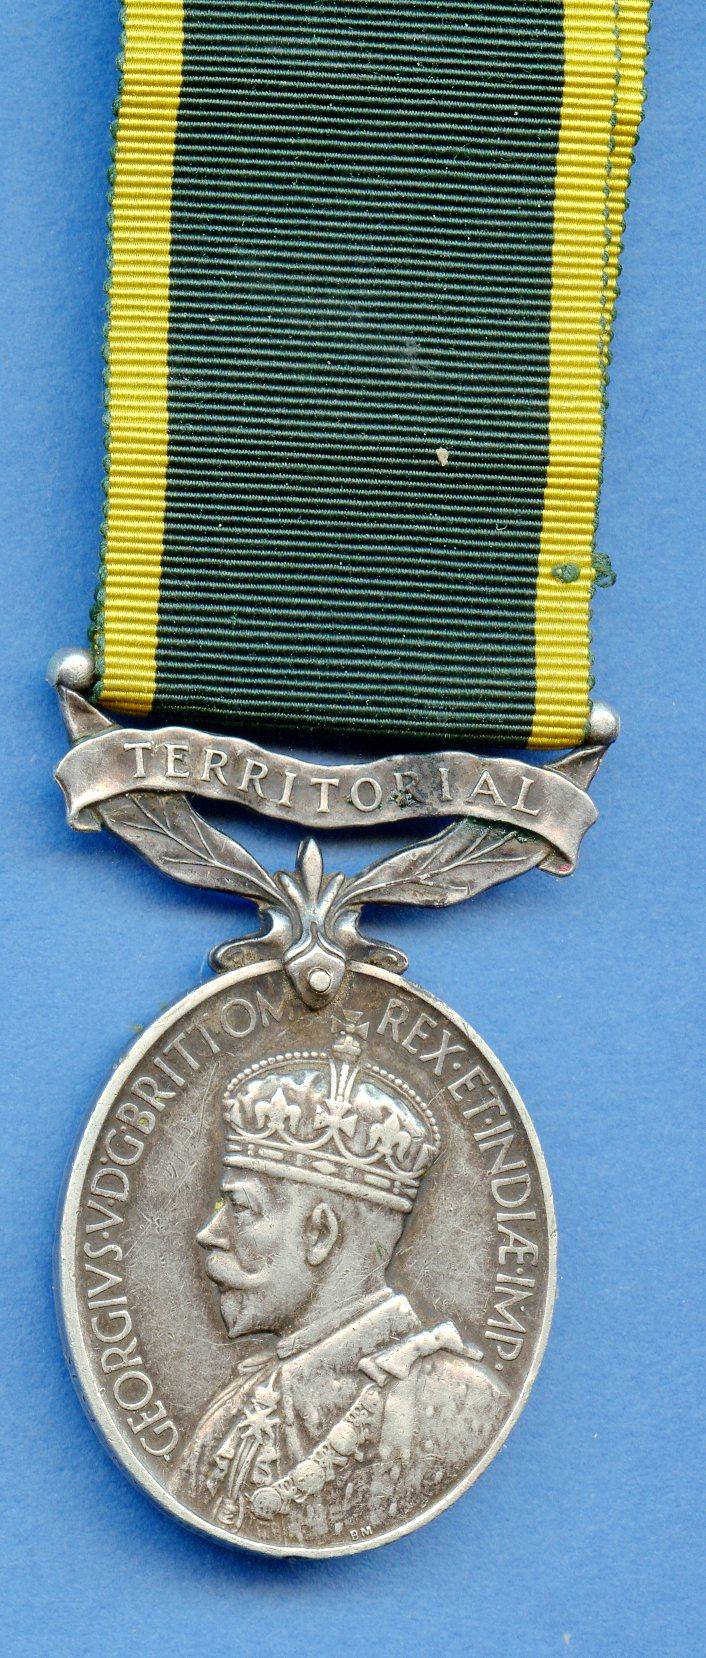 Territorial Efficiency Medal ; Fusilier G McDowell, 4-5th Battalion Royal Scots Fusiliers